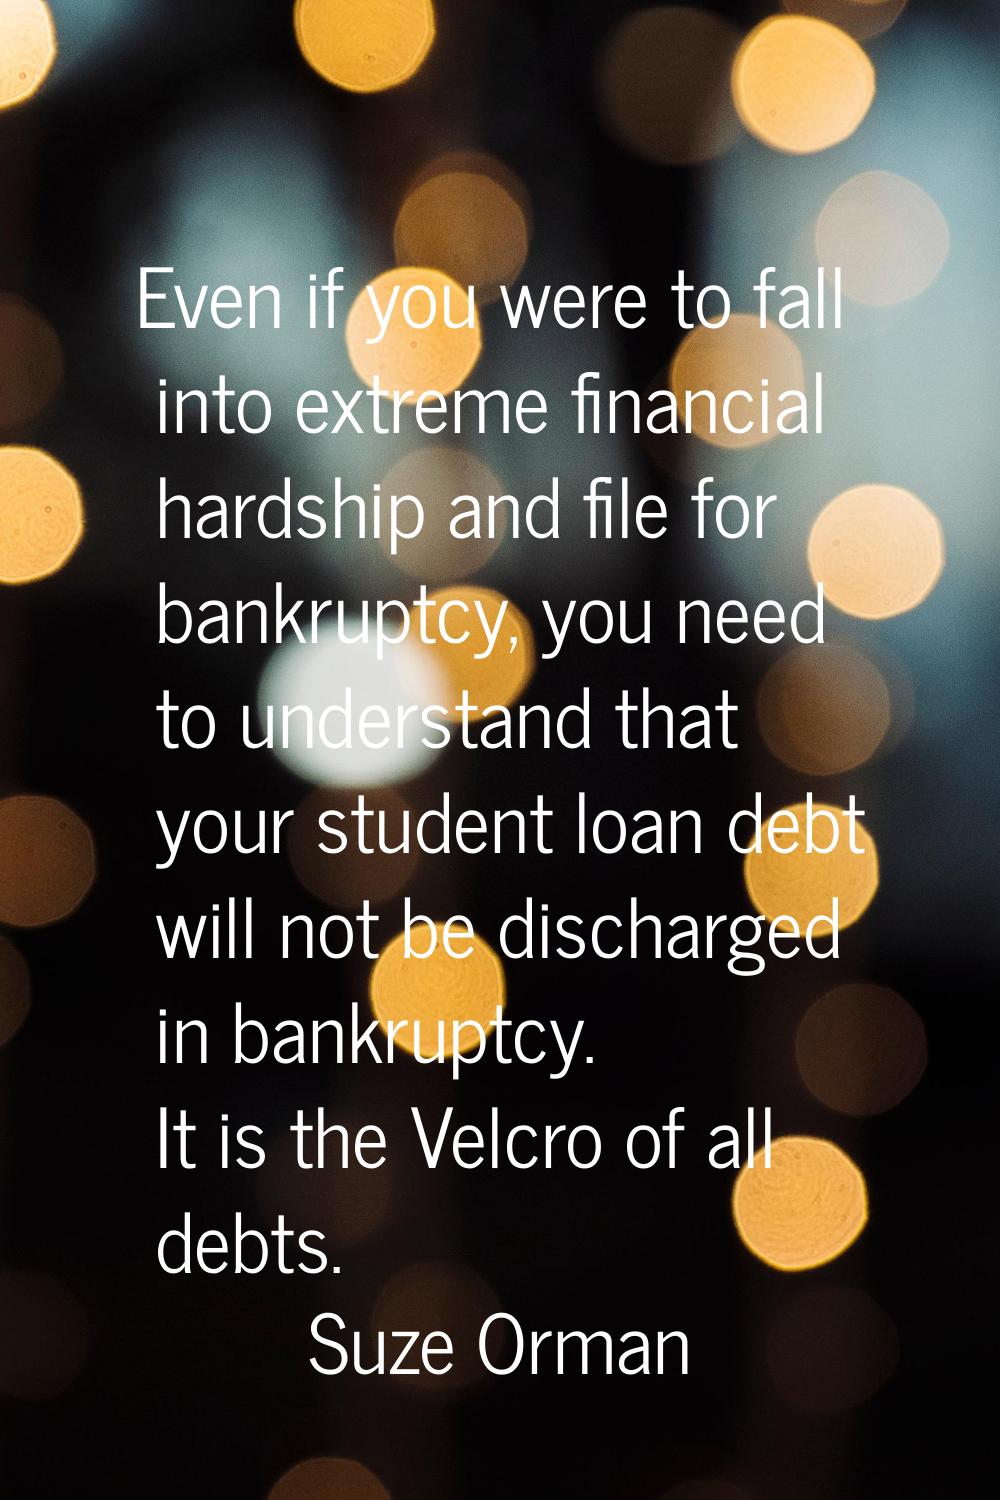 Even if you were to fall into extreme financial hardship and file for bankruptcy, you need to under